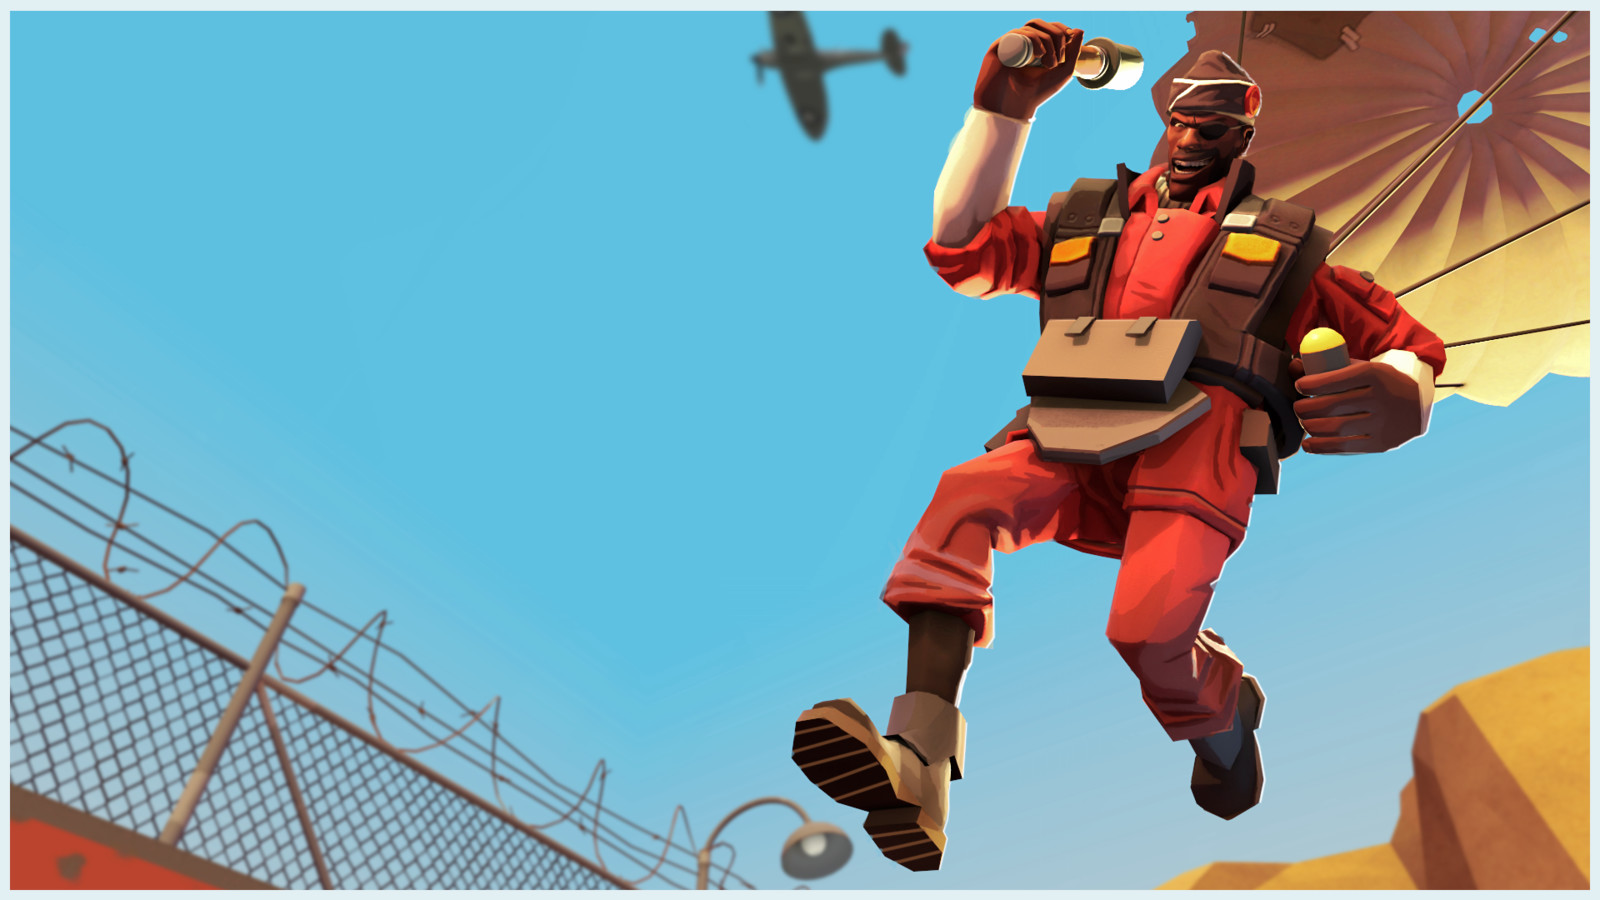 Demoman Paratrooper Set - Texture and Promo Render by me, Models by BlueNES, Concept by Extra Ram